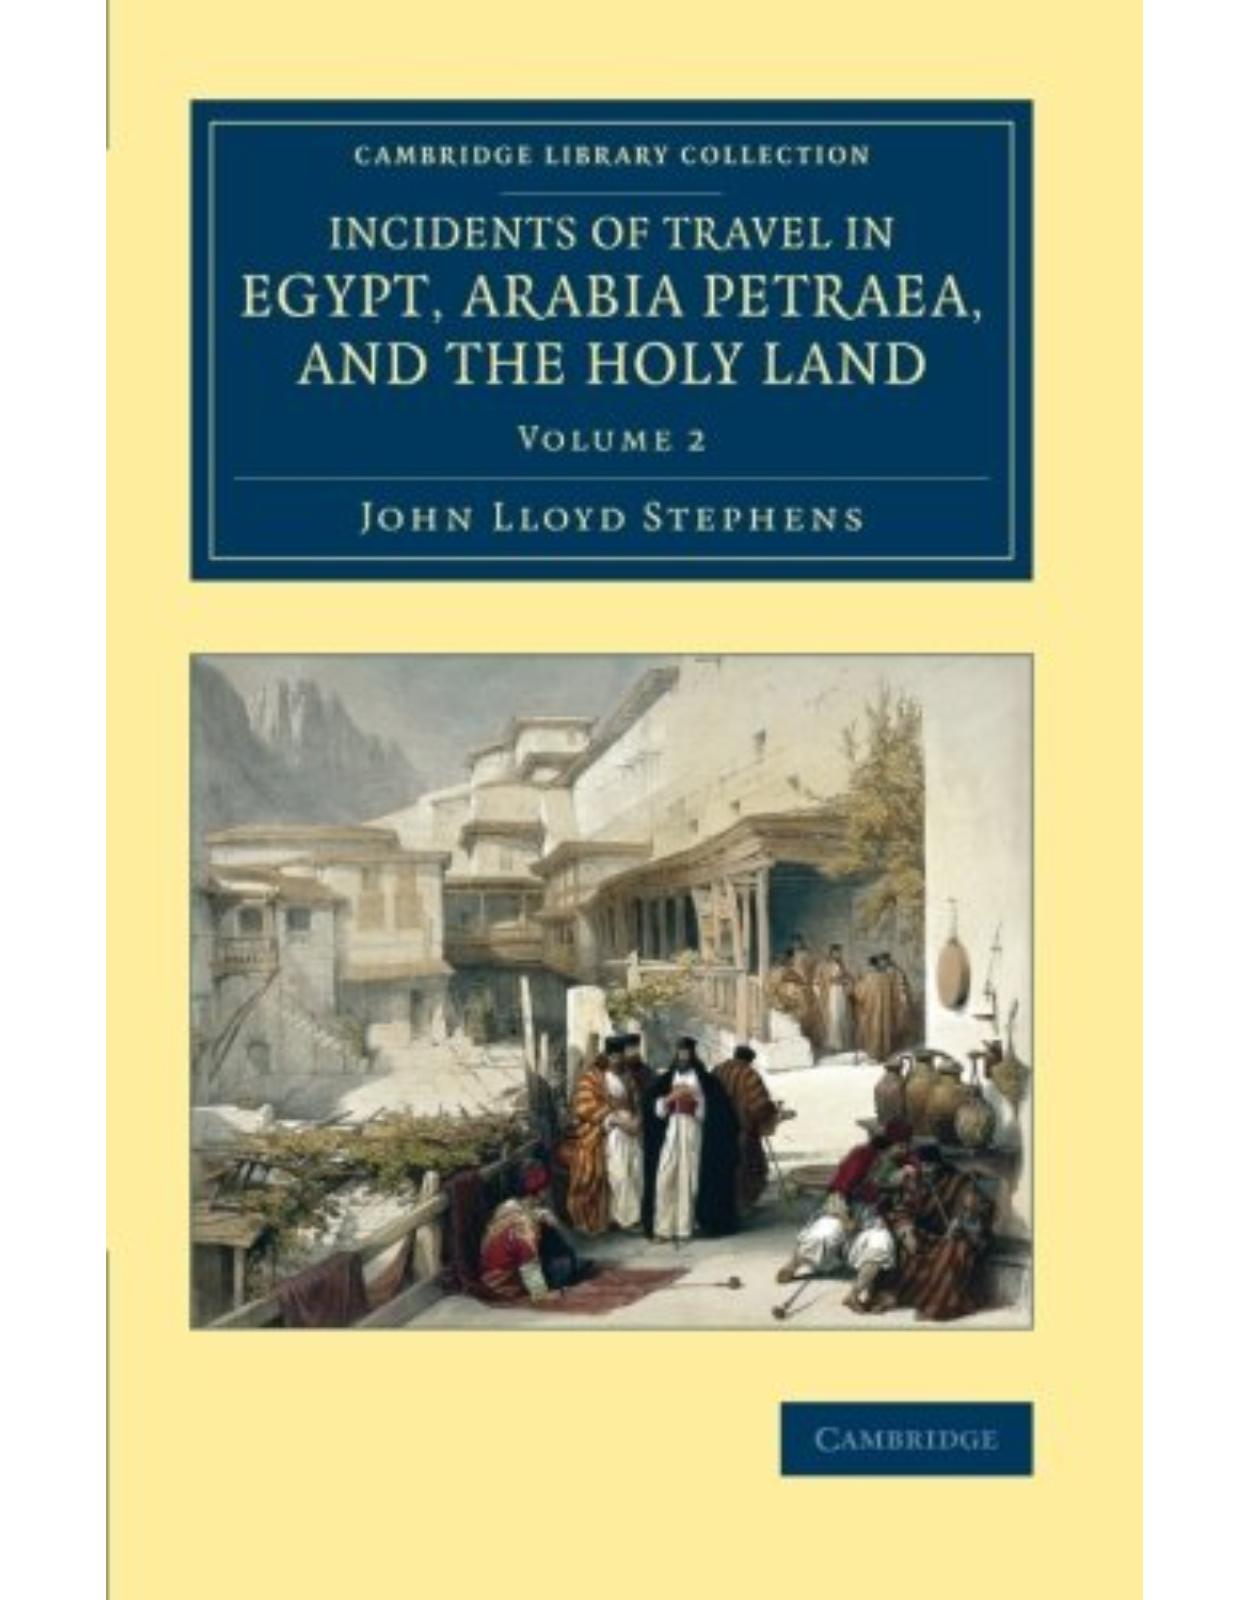 Incidents of Travel in Egypt, Arabia Petraea, and the Holy Land: Volume 2 (Cambridge Library Collection - Archaeology)